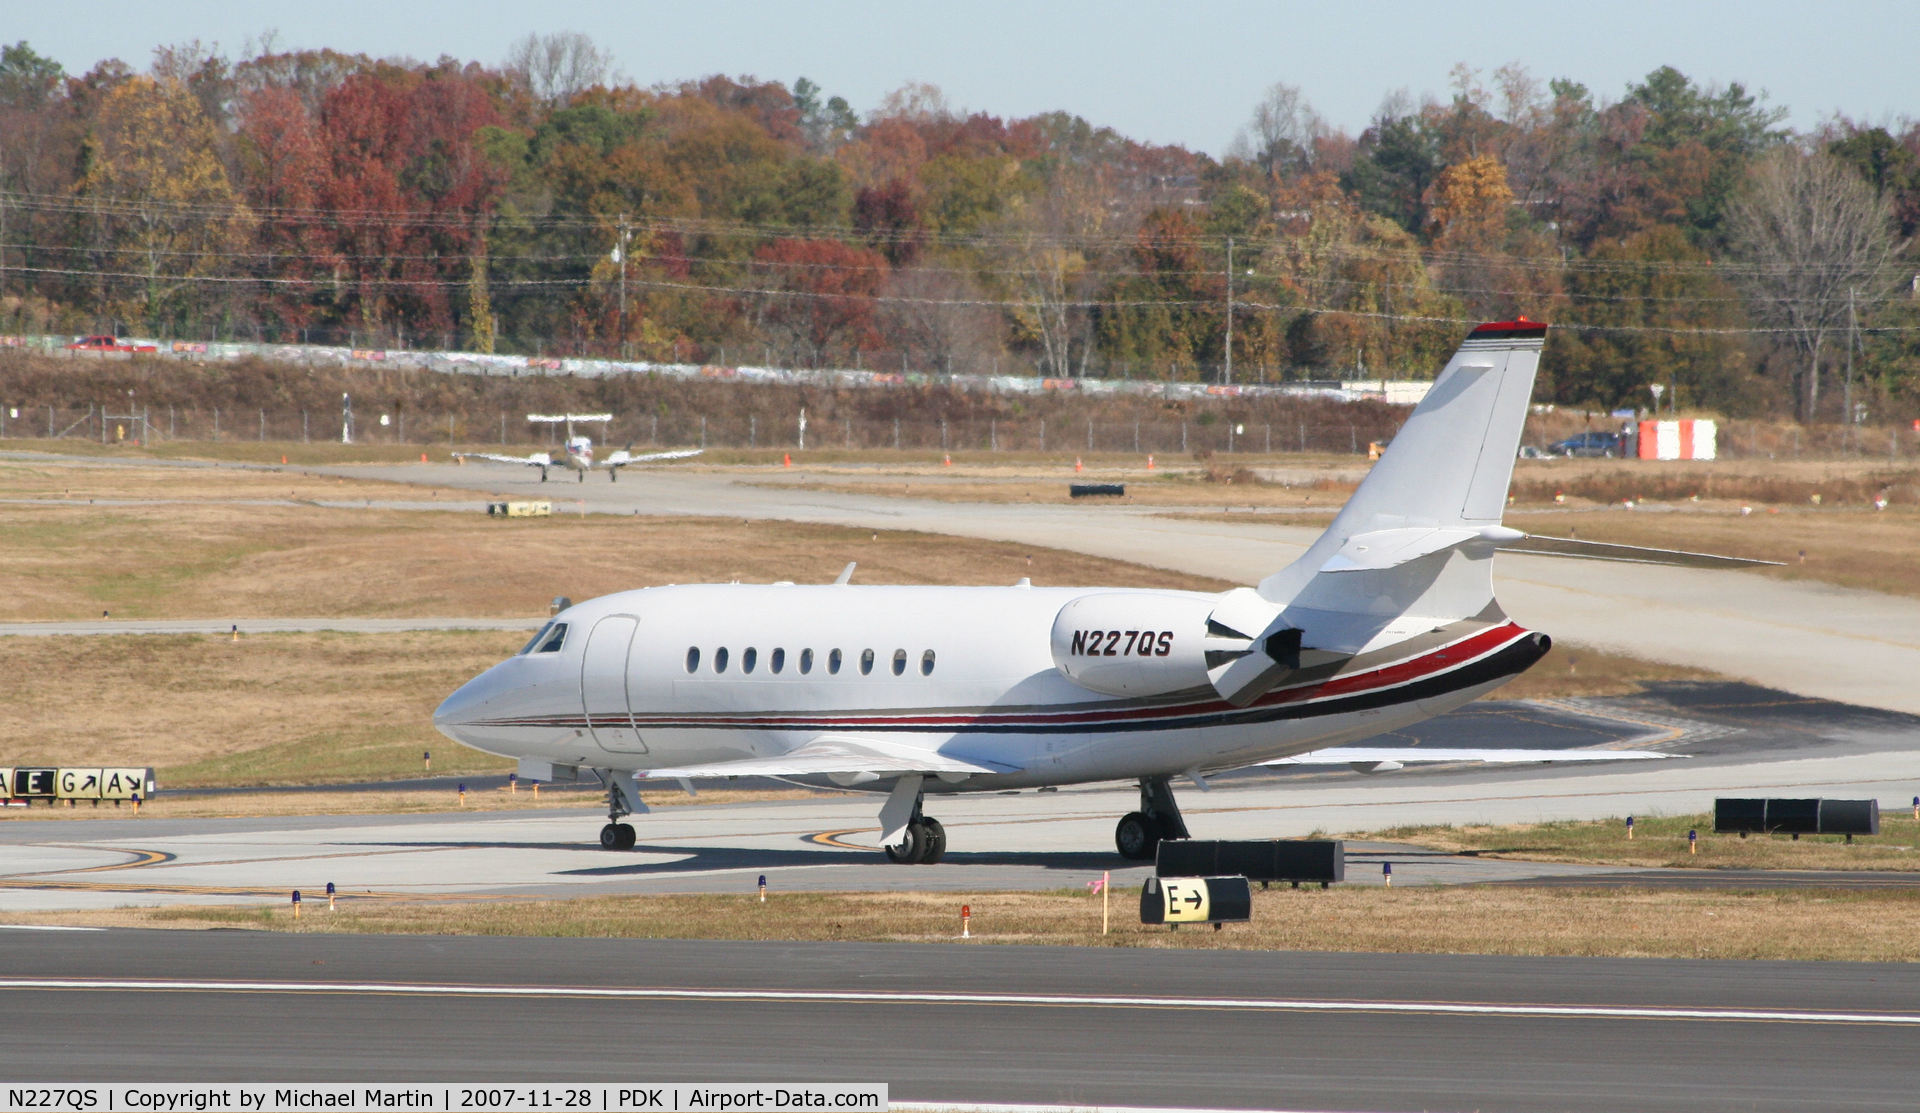 N227QS, 2000 Dassault Falcon 2000 C/N 127, Taxing to Signature Flight Services